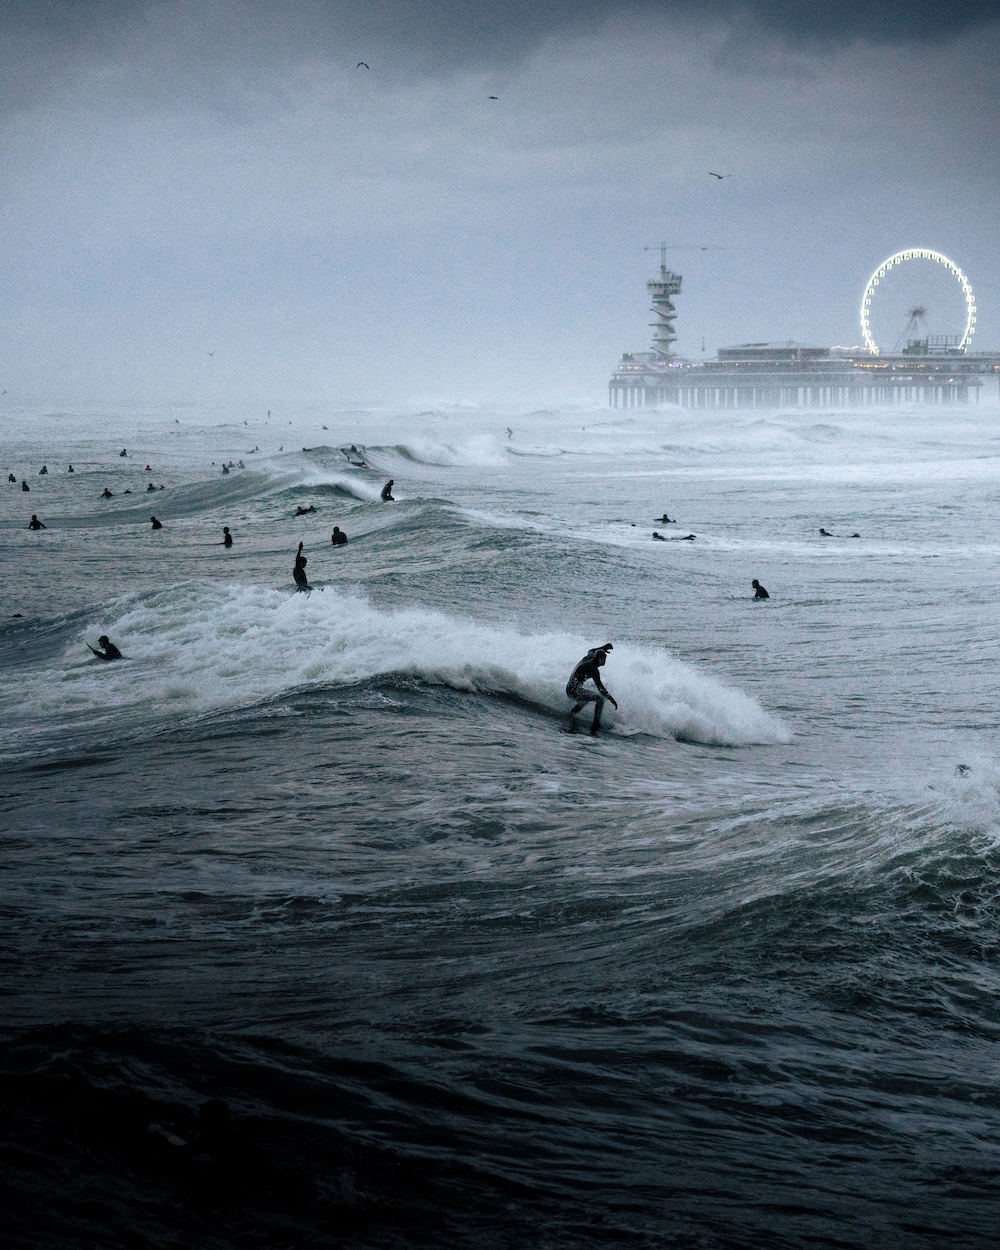 Raido Nurk's Surfing Festival, Winner, Open competition, Motion, Sony World Photography Awards 2022